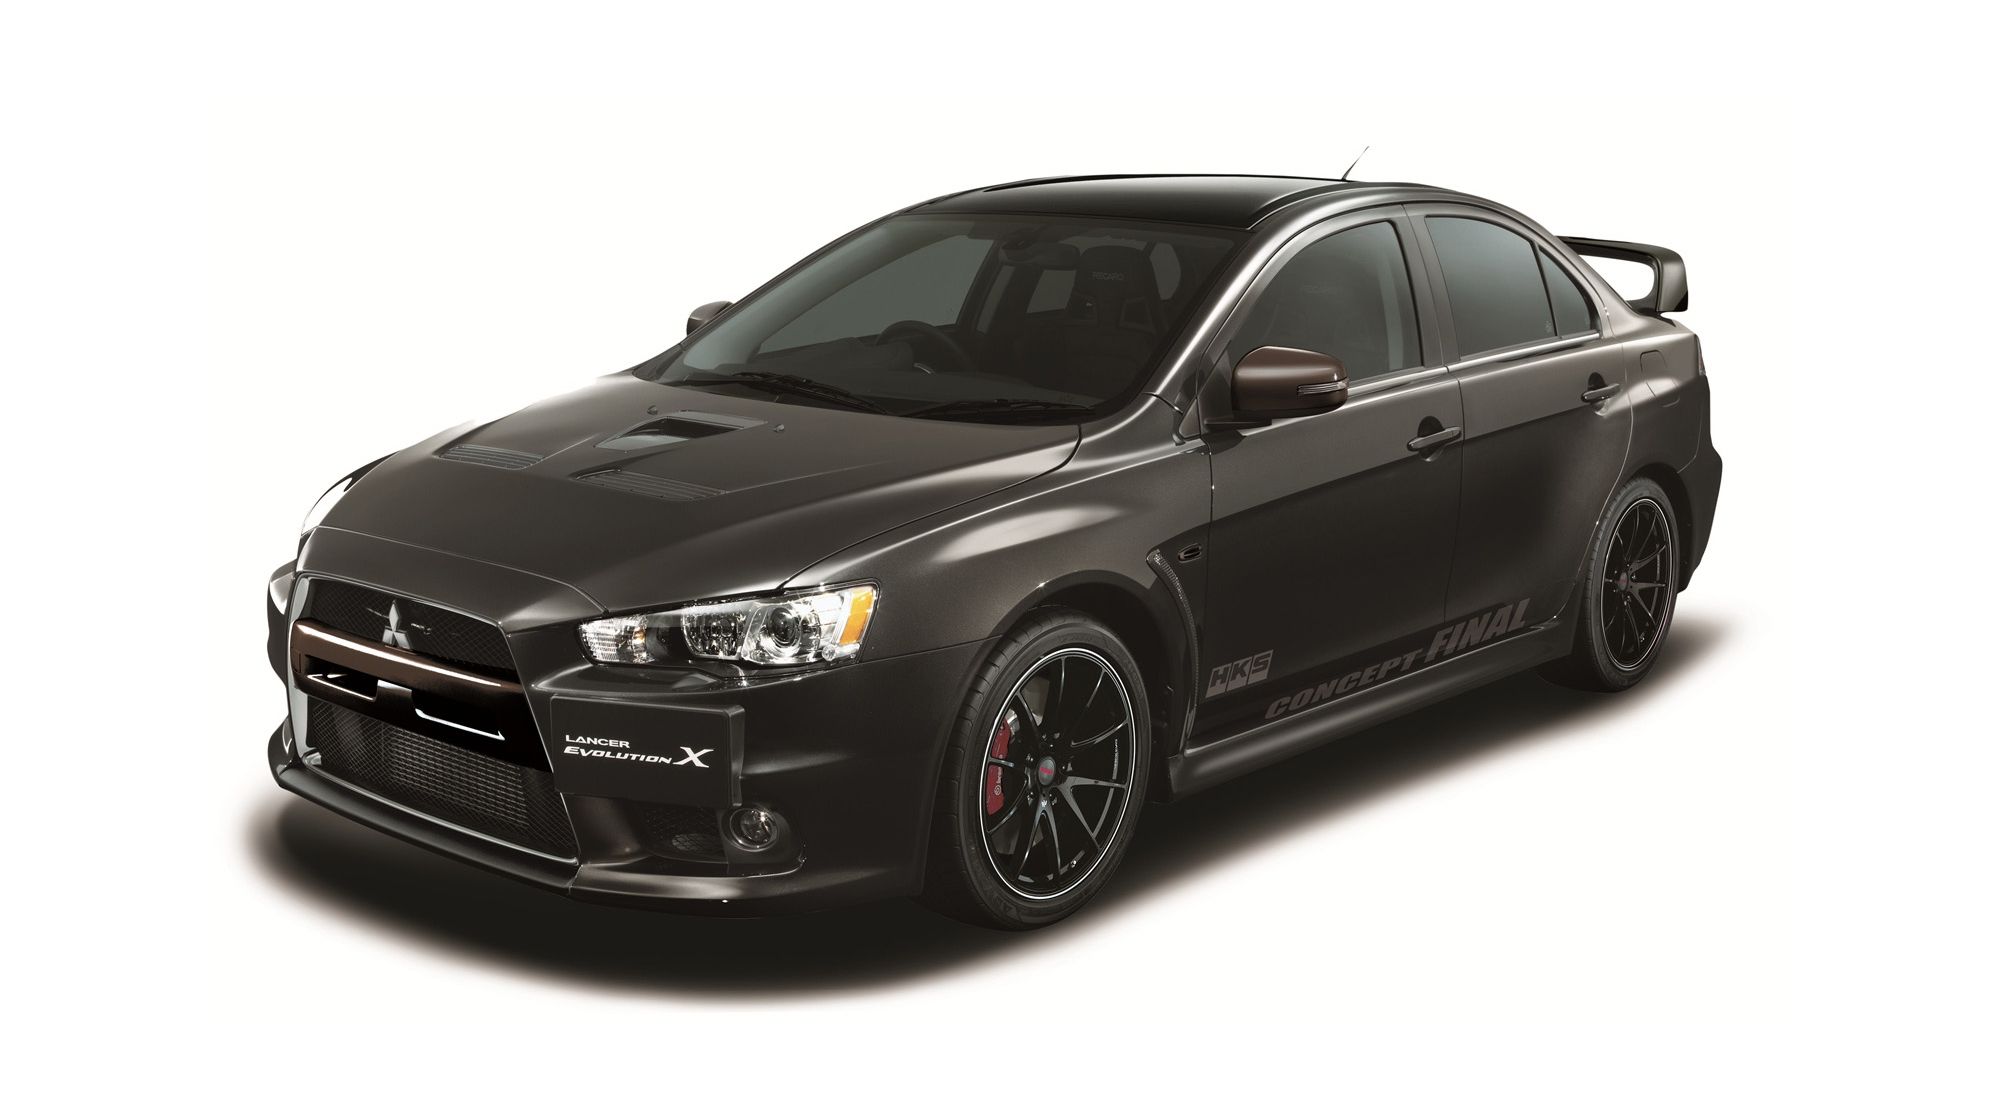  The Lancer Evolution X HKS Final Concept is a 480-horsepower farewell to the iconic rally car turned street rig. Now if only Mitsu would built a production model. 